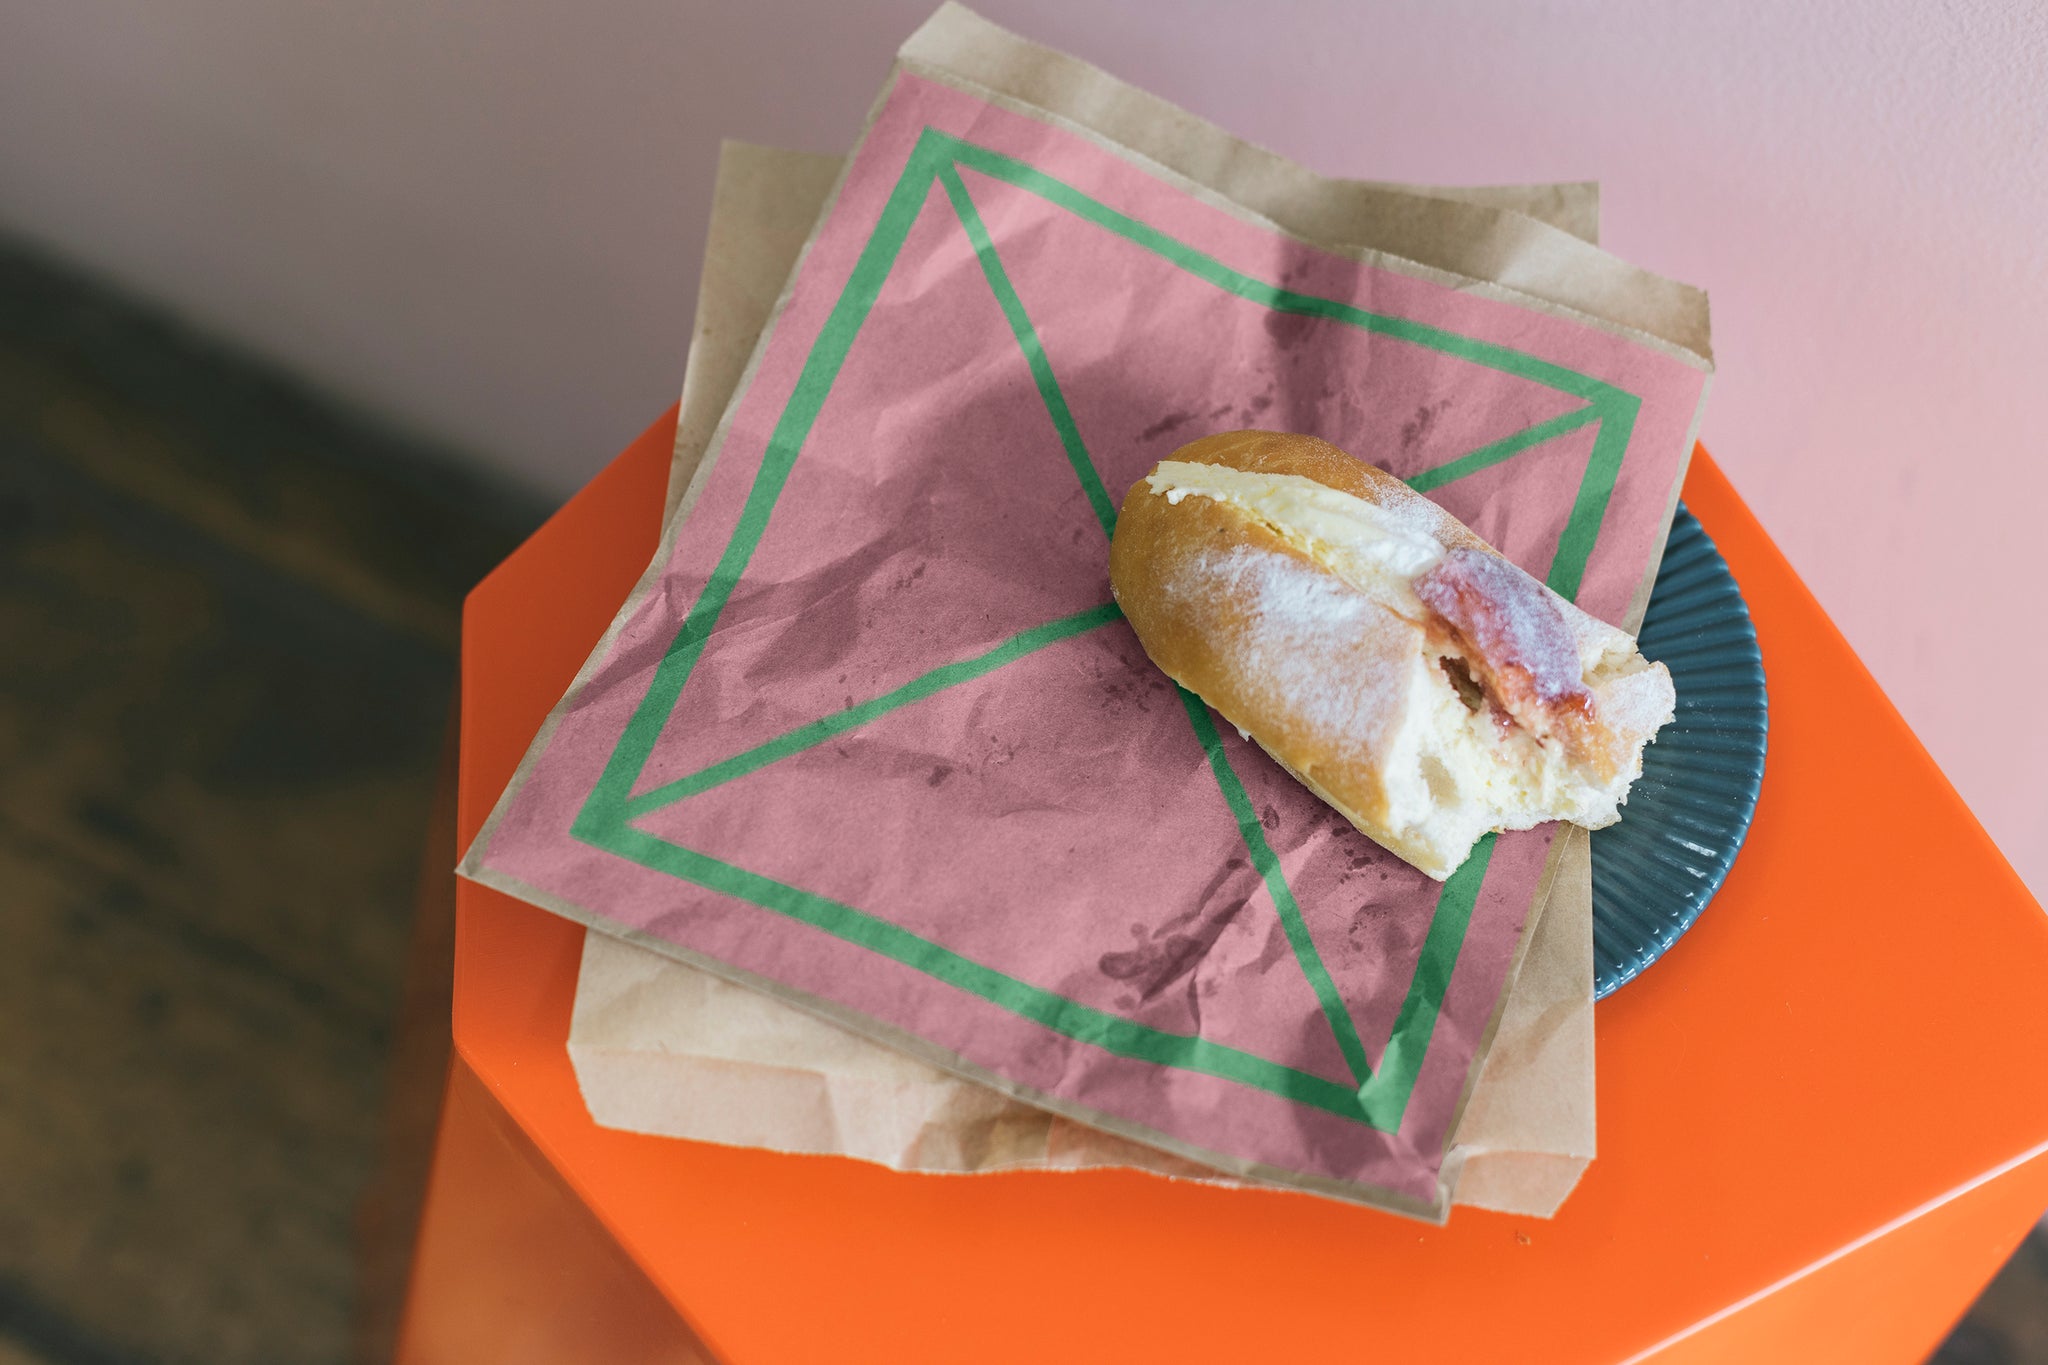 Brown paper bag placed on top of orange hexagon shaped stool. A Half eaten fresh cream donut with jam is place on top of bag. A big pink square is embedded on the bag with a bright green X in the middle of the square. 